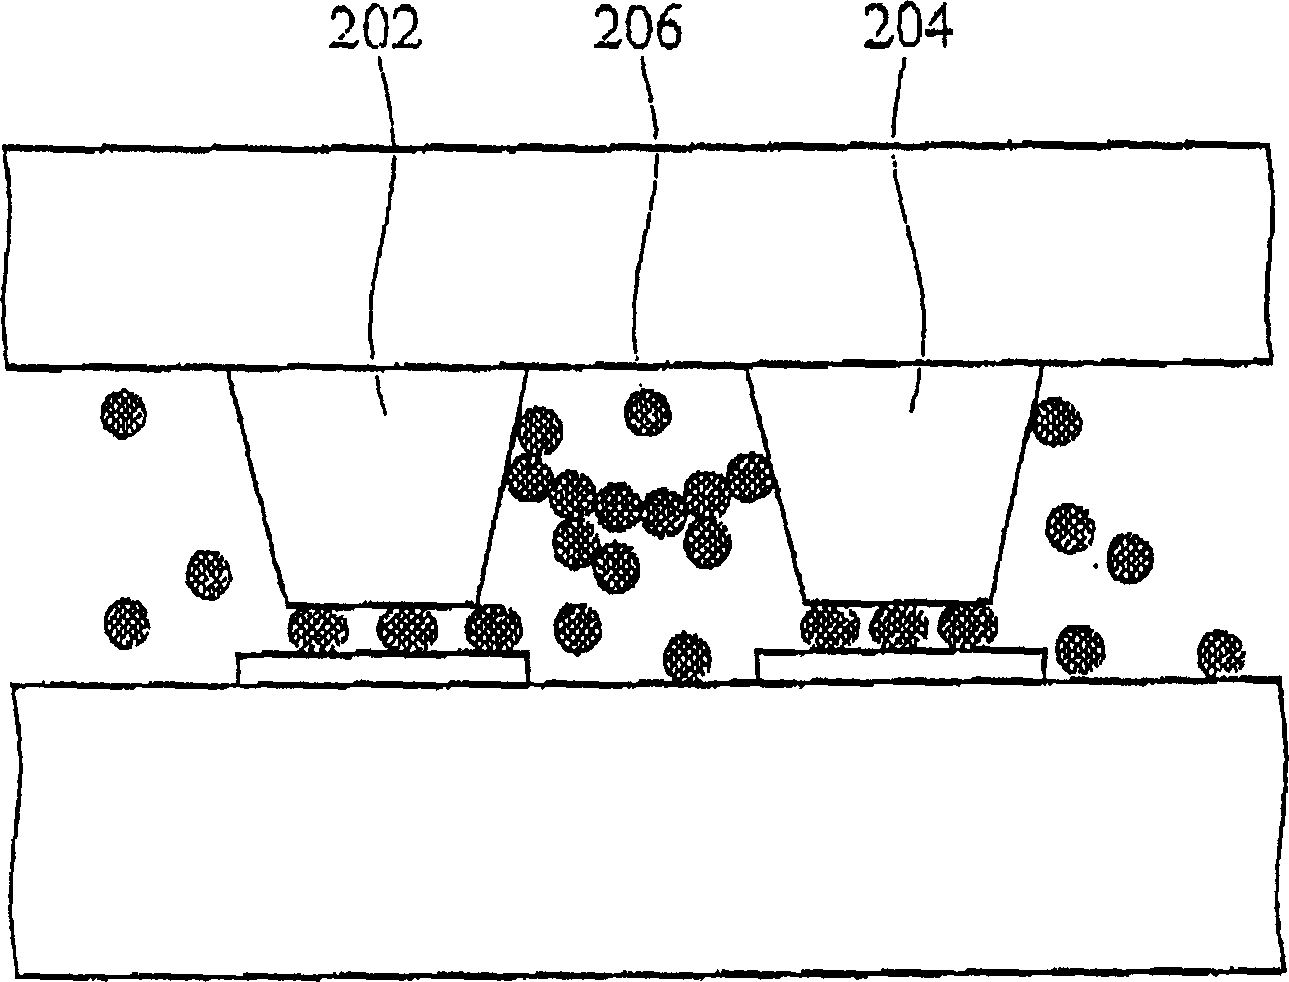 Composite scab structure and producing method thereof